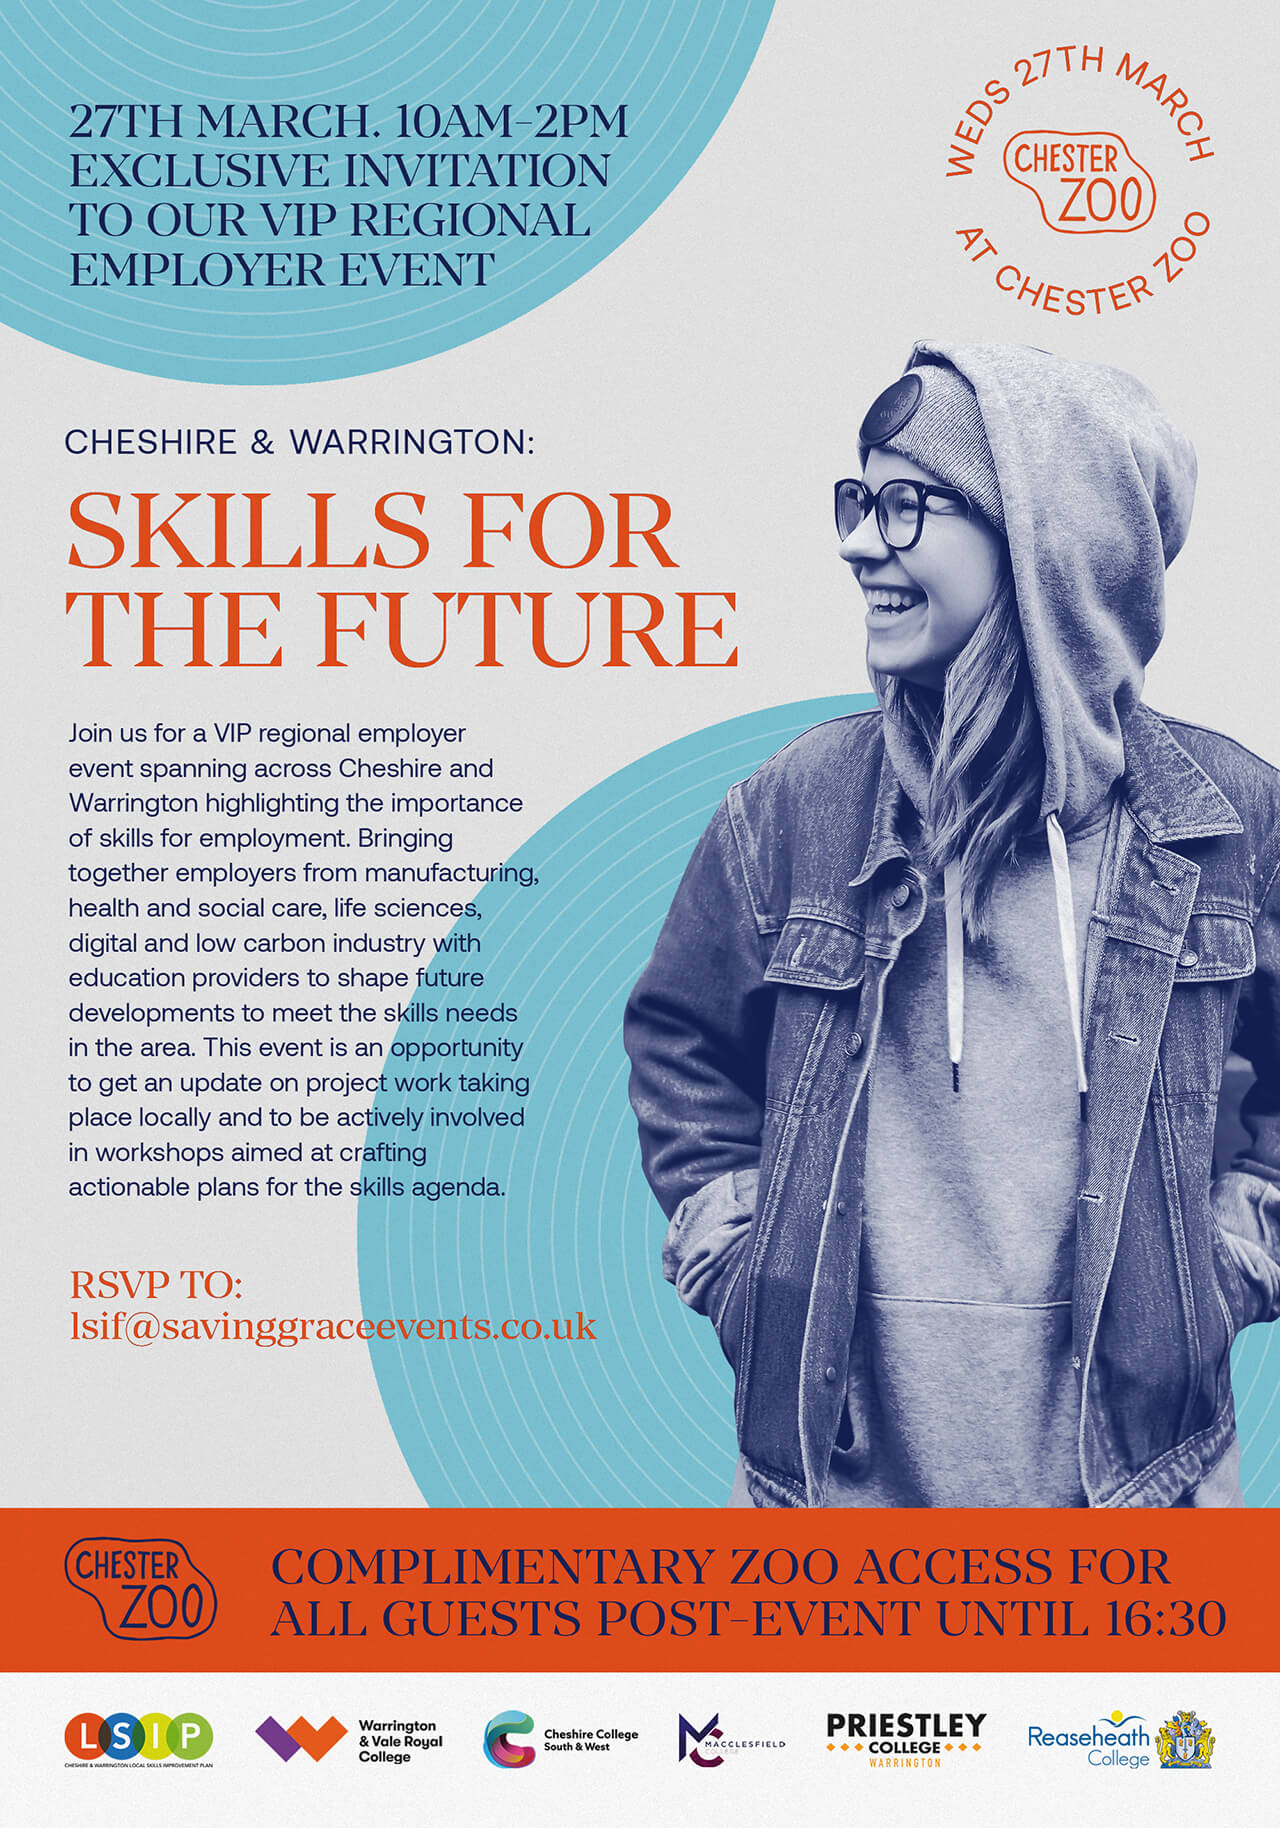 YOUR CHANCE TO SHAPE THE SKILLS AGENDA